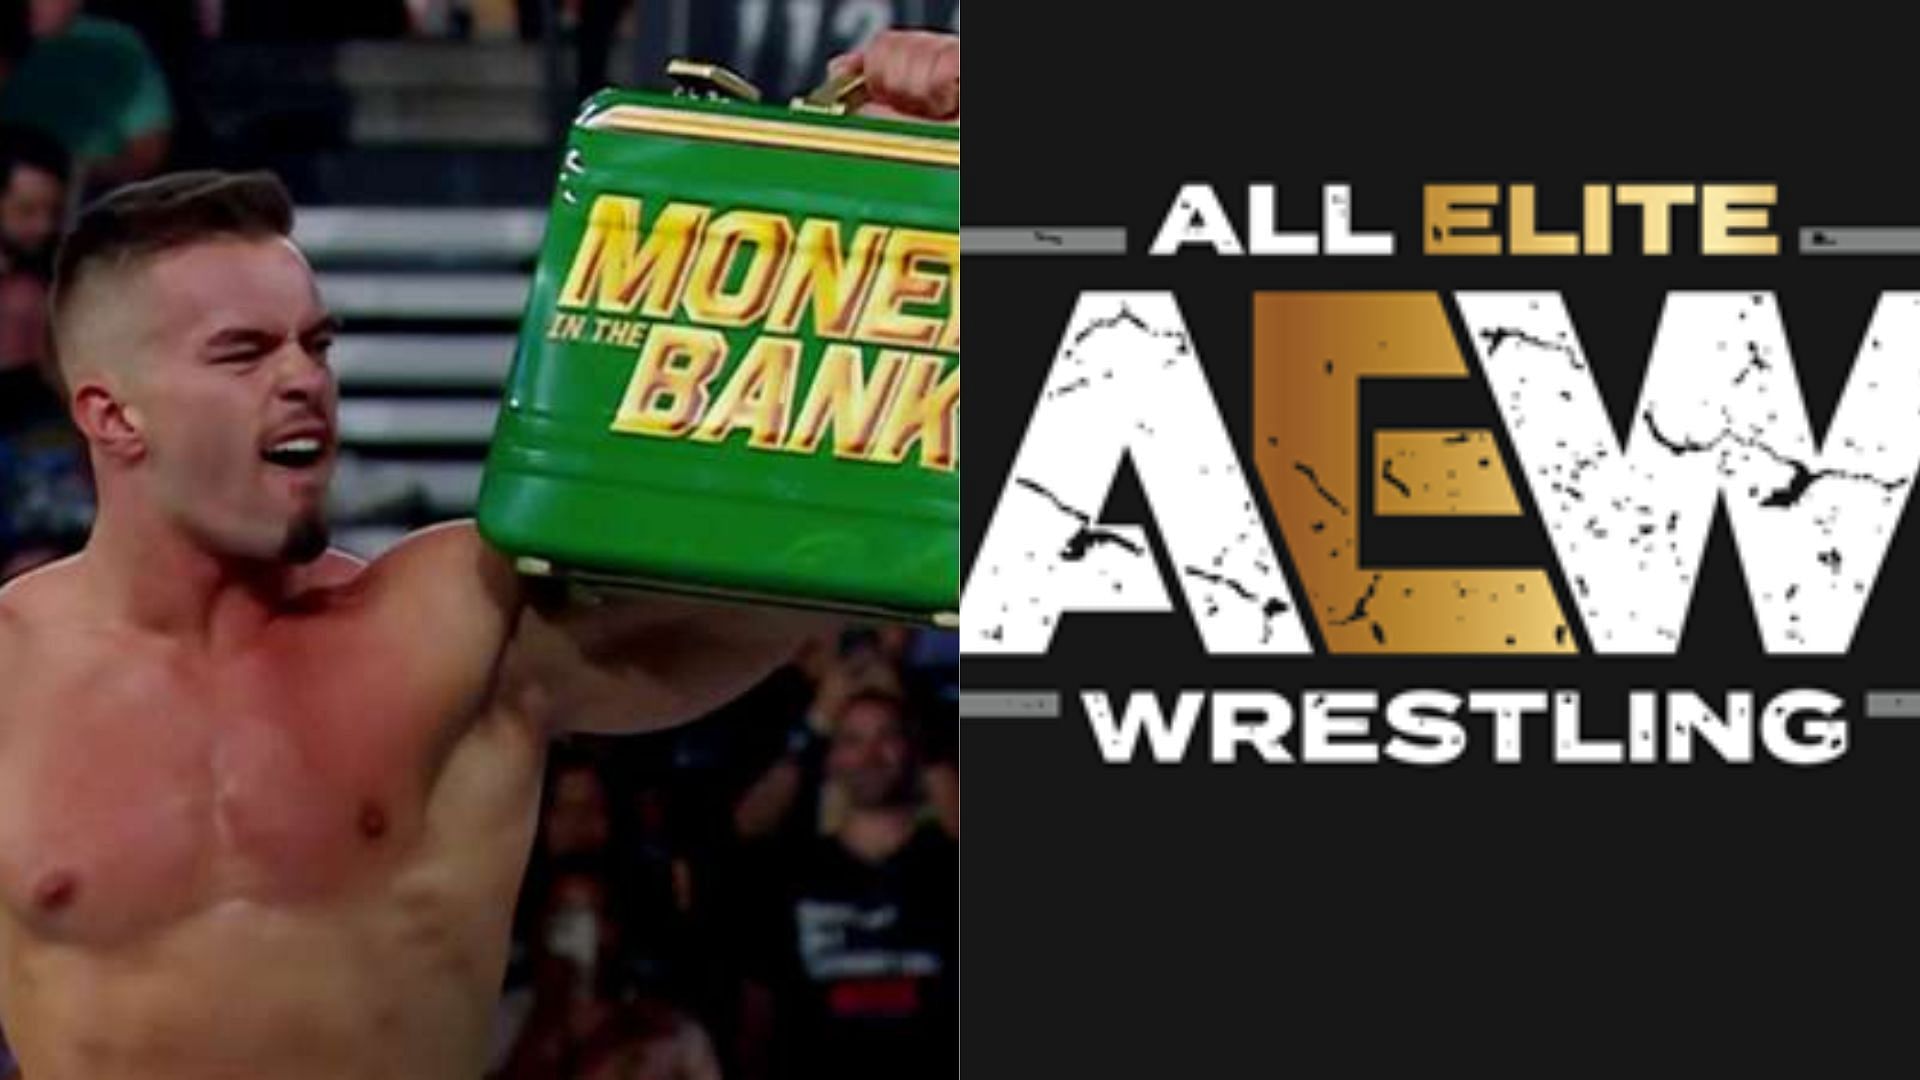 Theory is the Money in the Bank briefcase holder